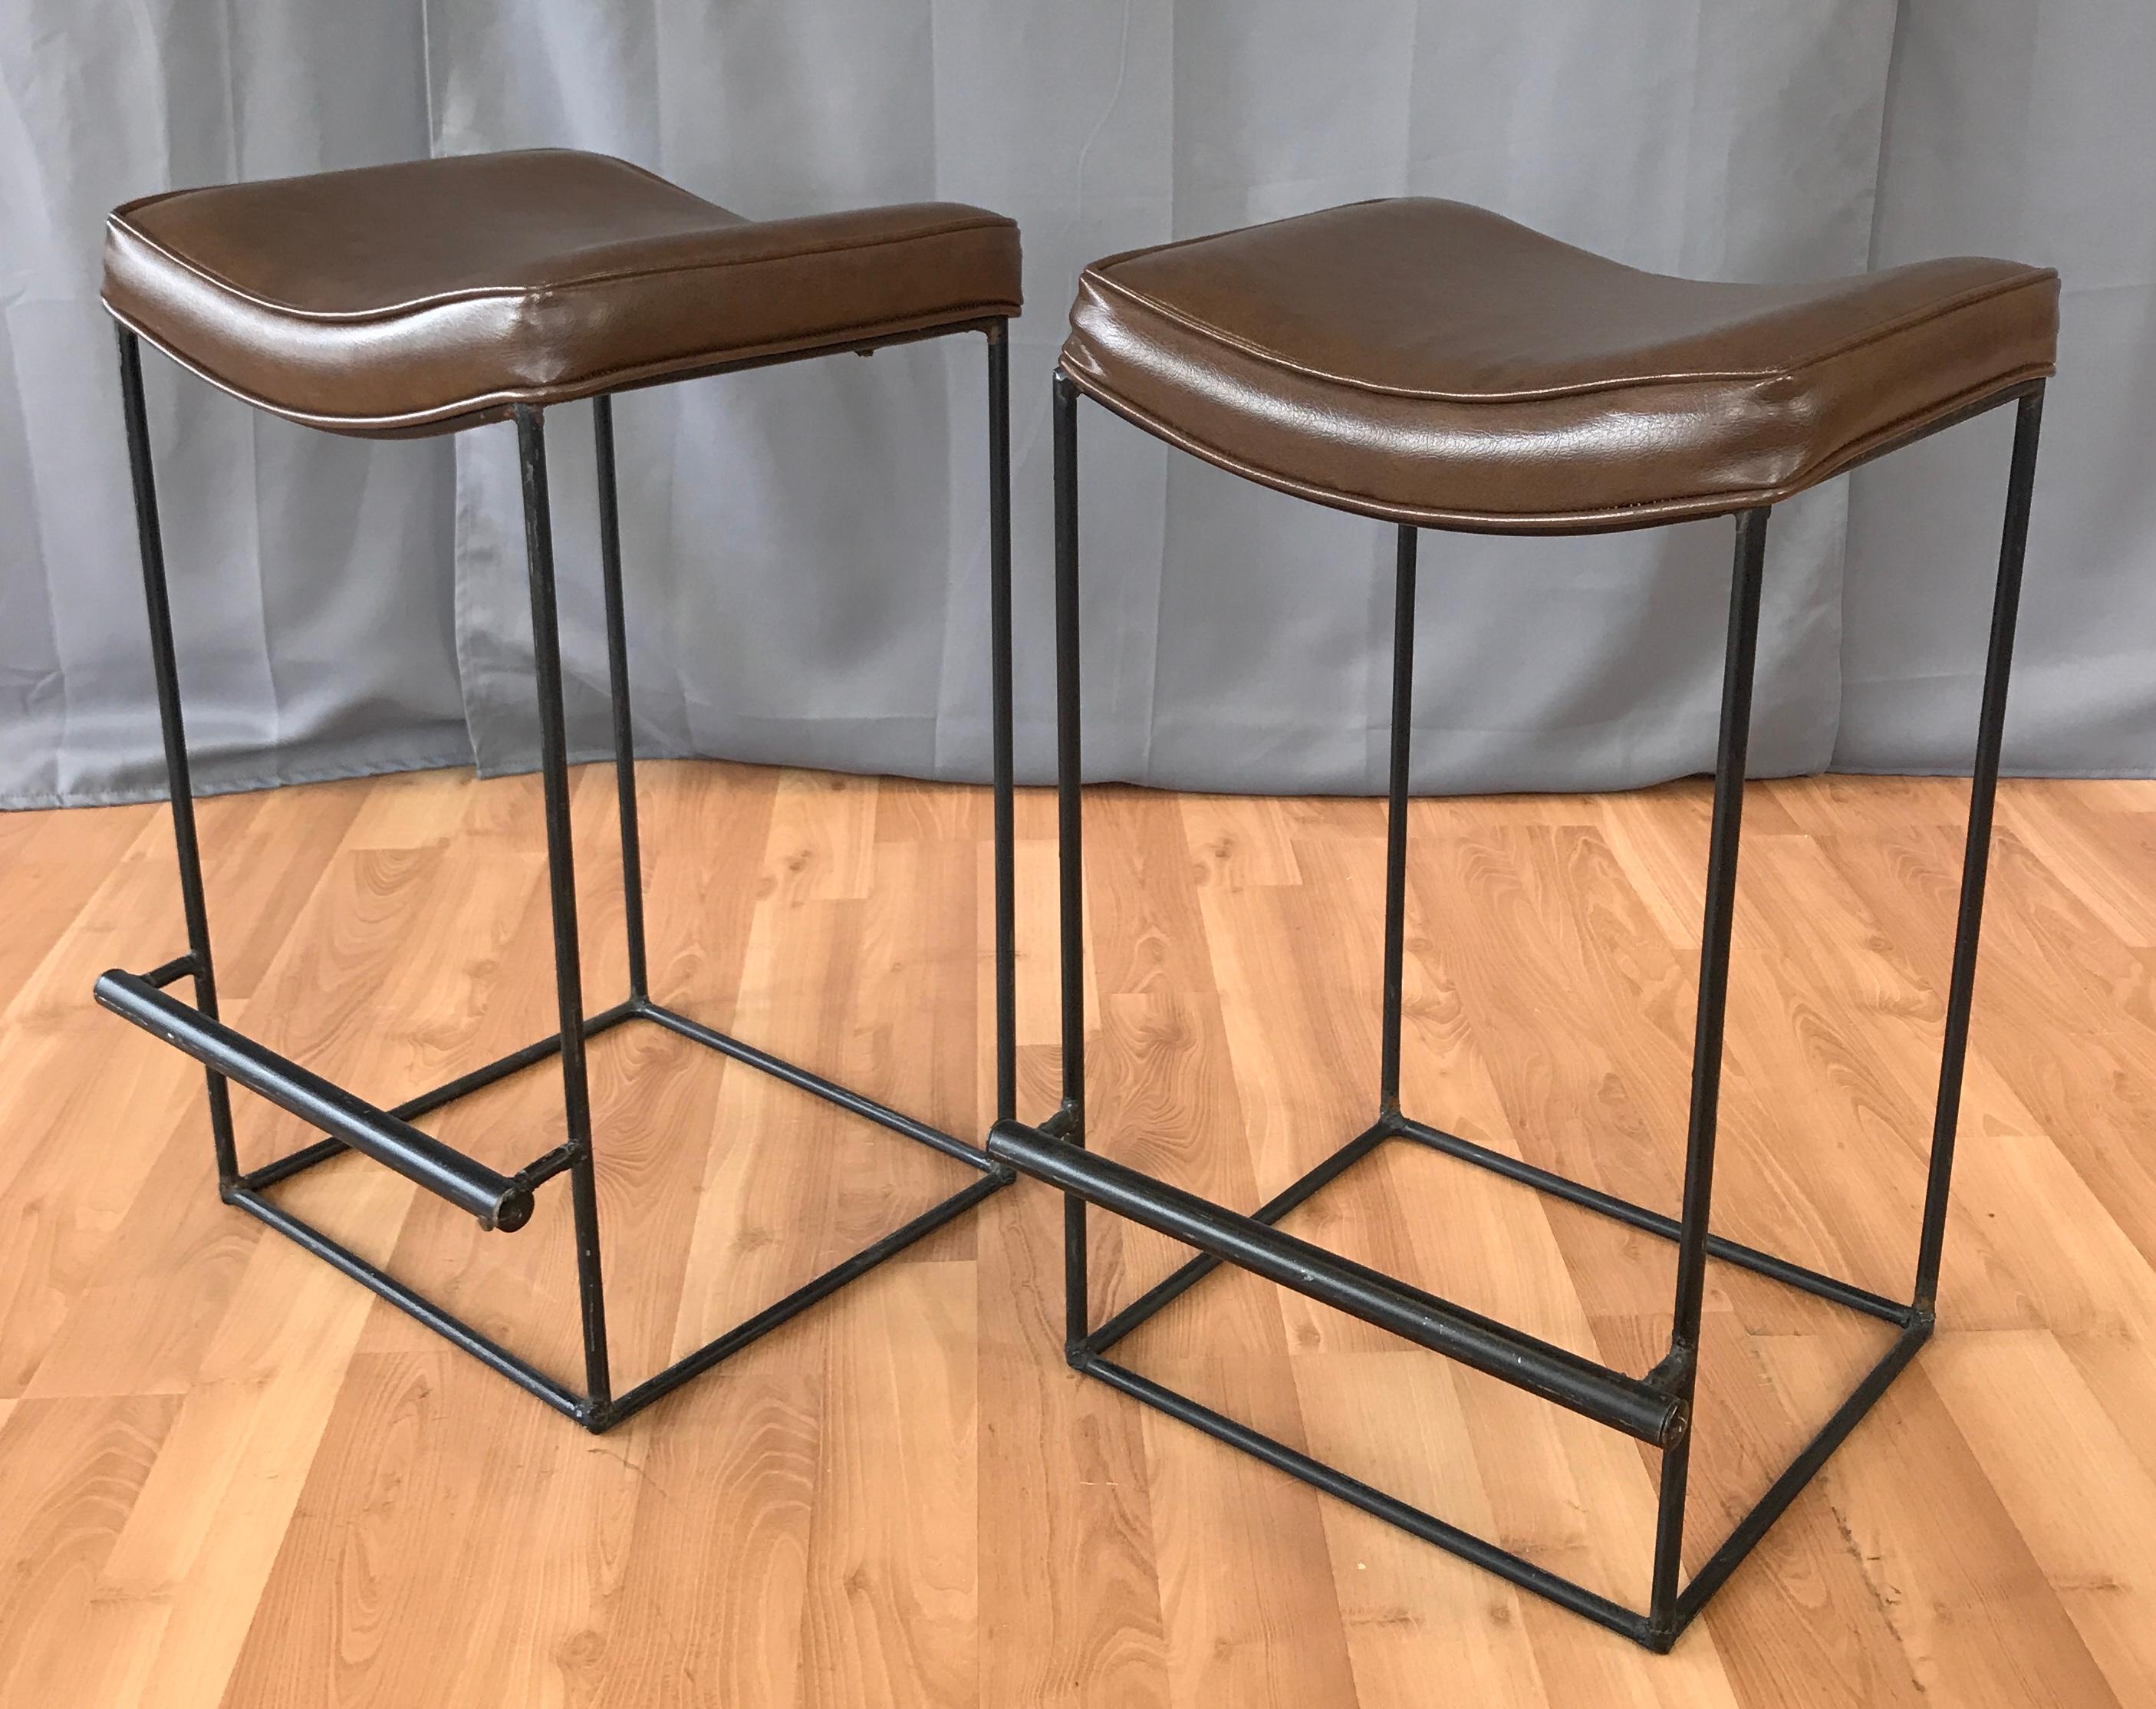 Offered here is a pair 1970s Shaver Howard counter stools

Stools features a footrest and coco colored vinyl contoured seats. The square steel frame is black and the footrest is tubular. Very clean lines similar to the work of Arthur Conover and